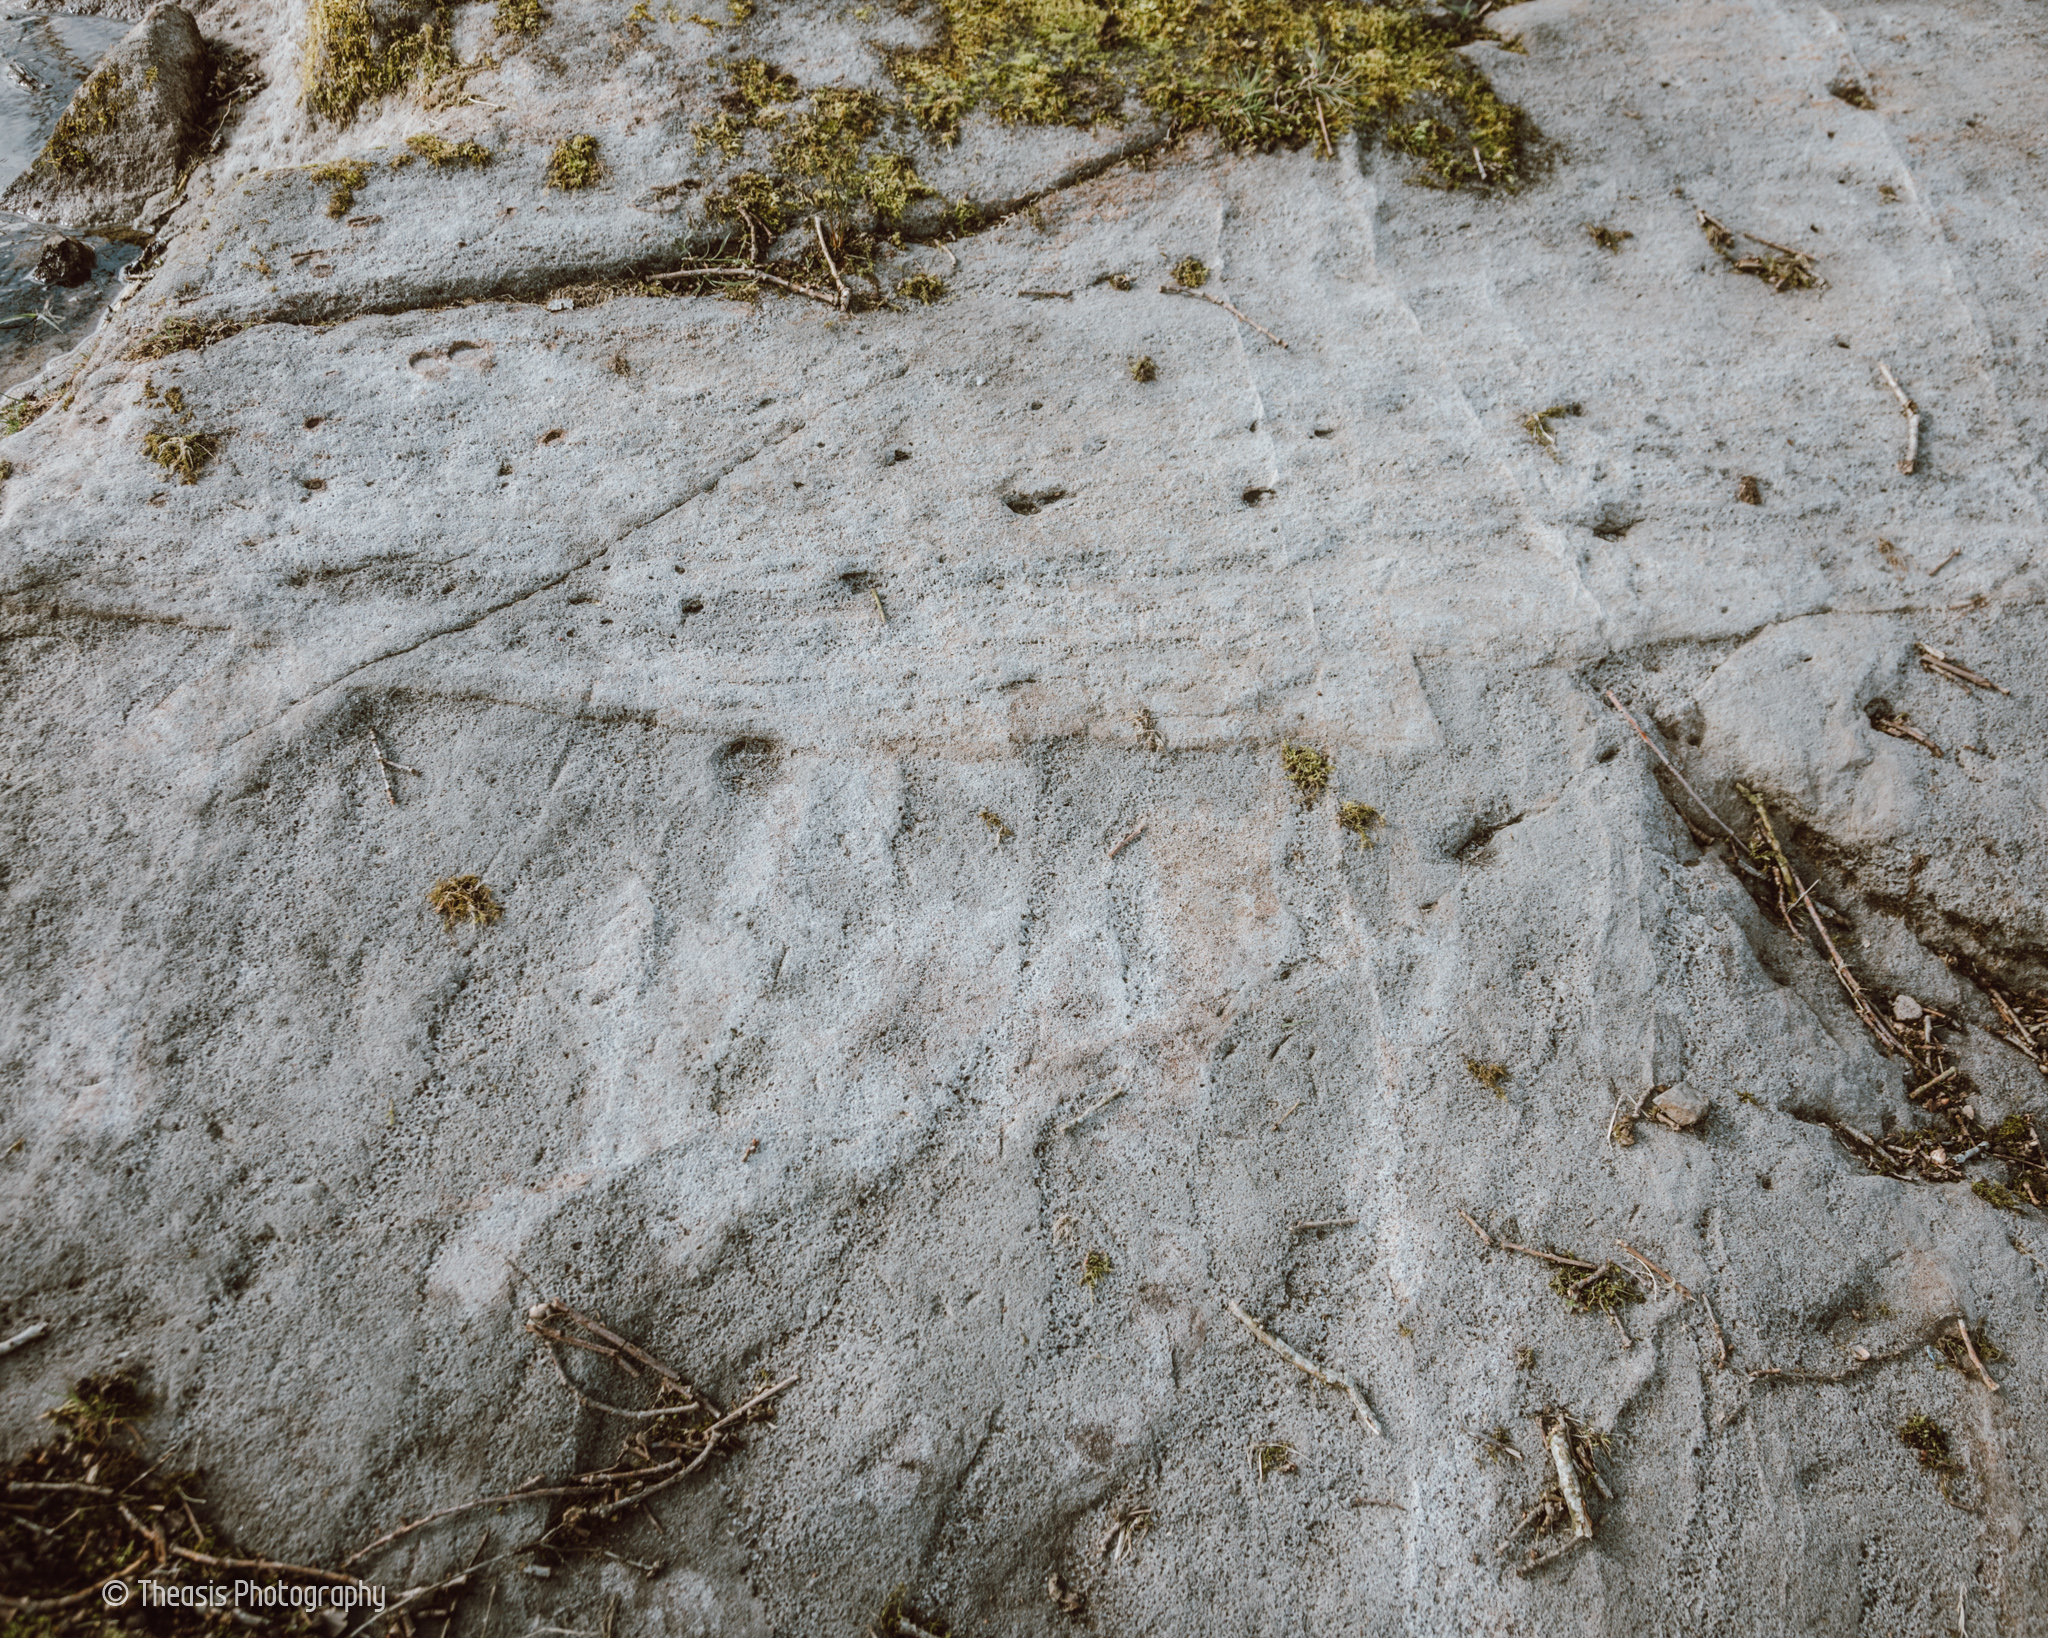 The tool-marked eastern surface of the outcrop.